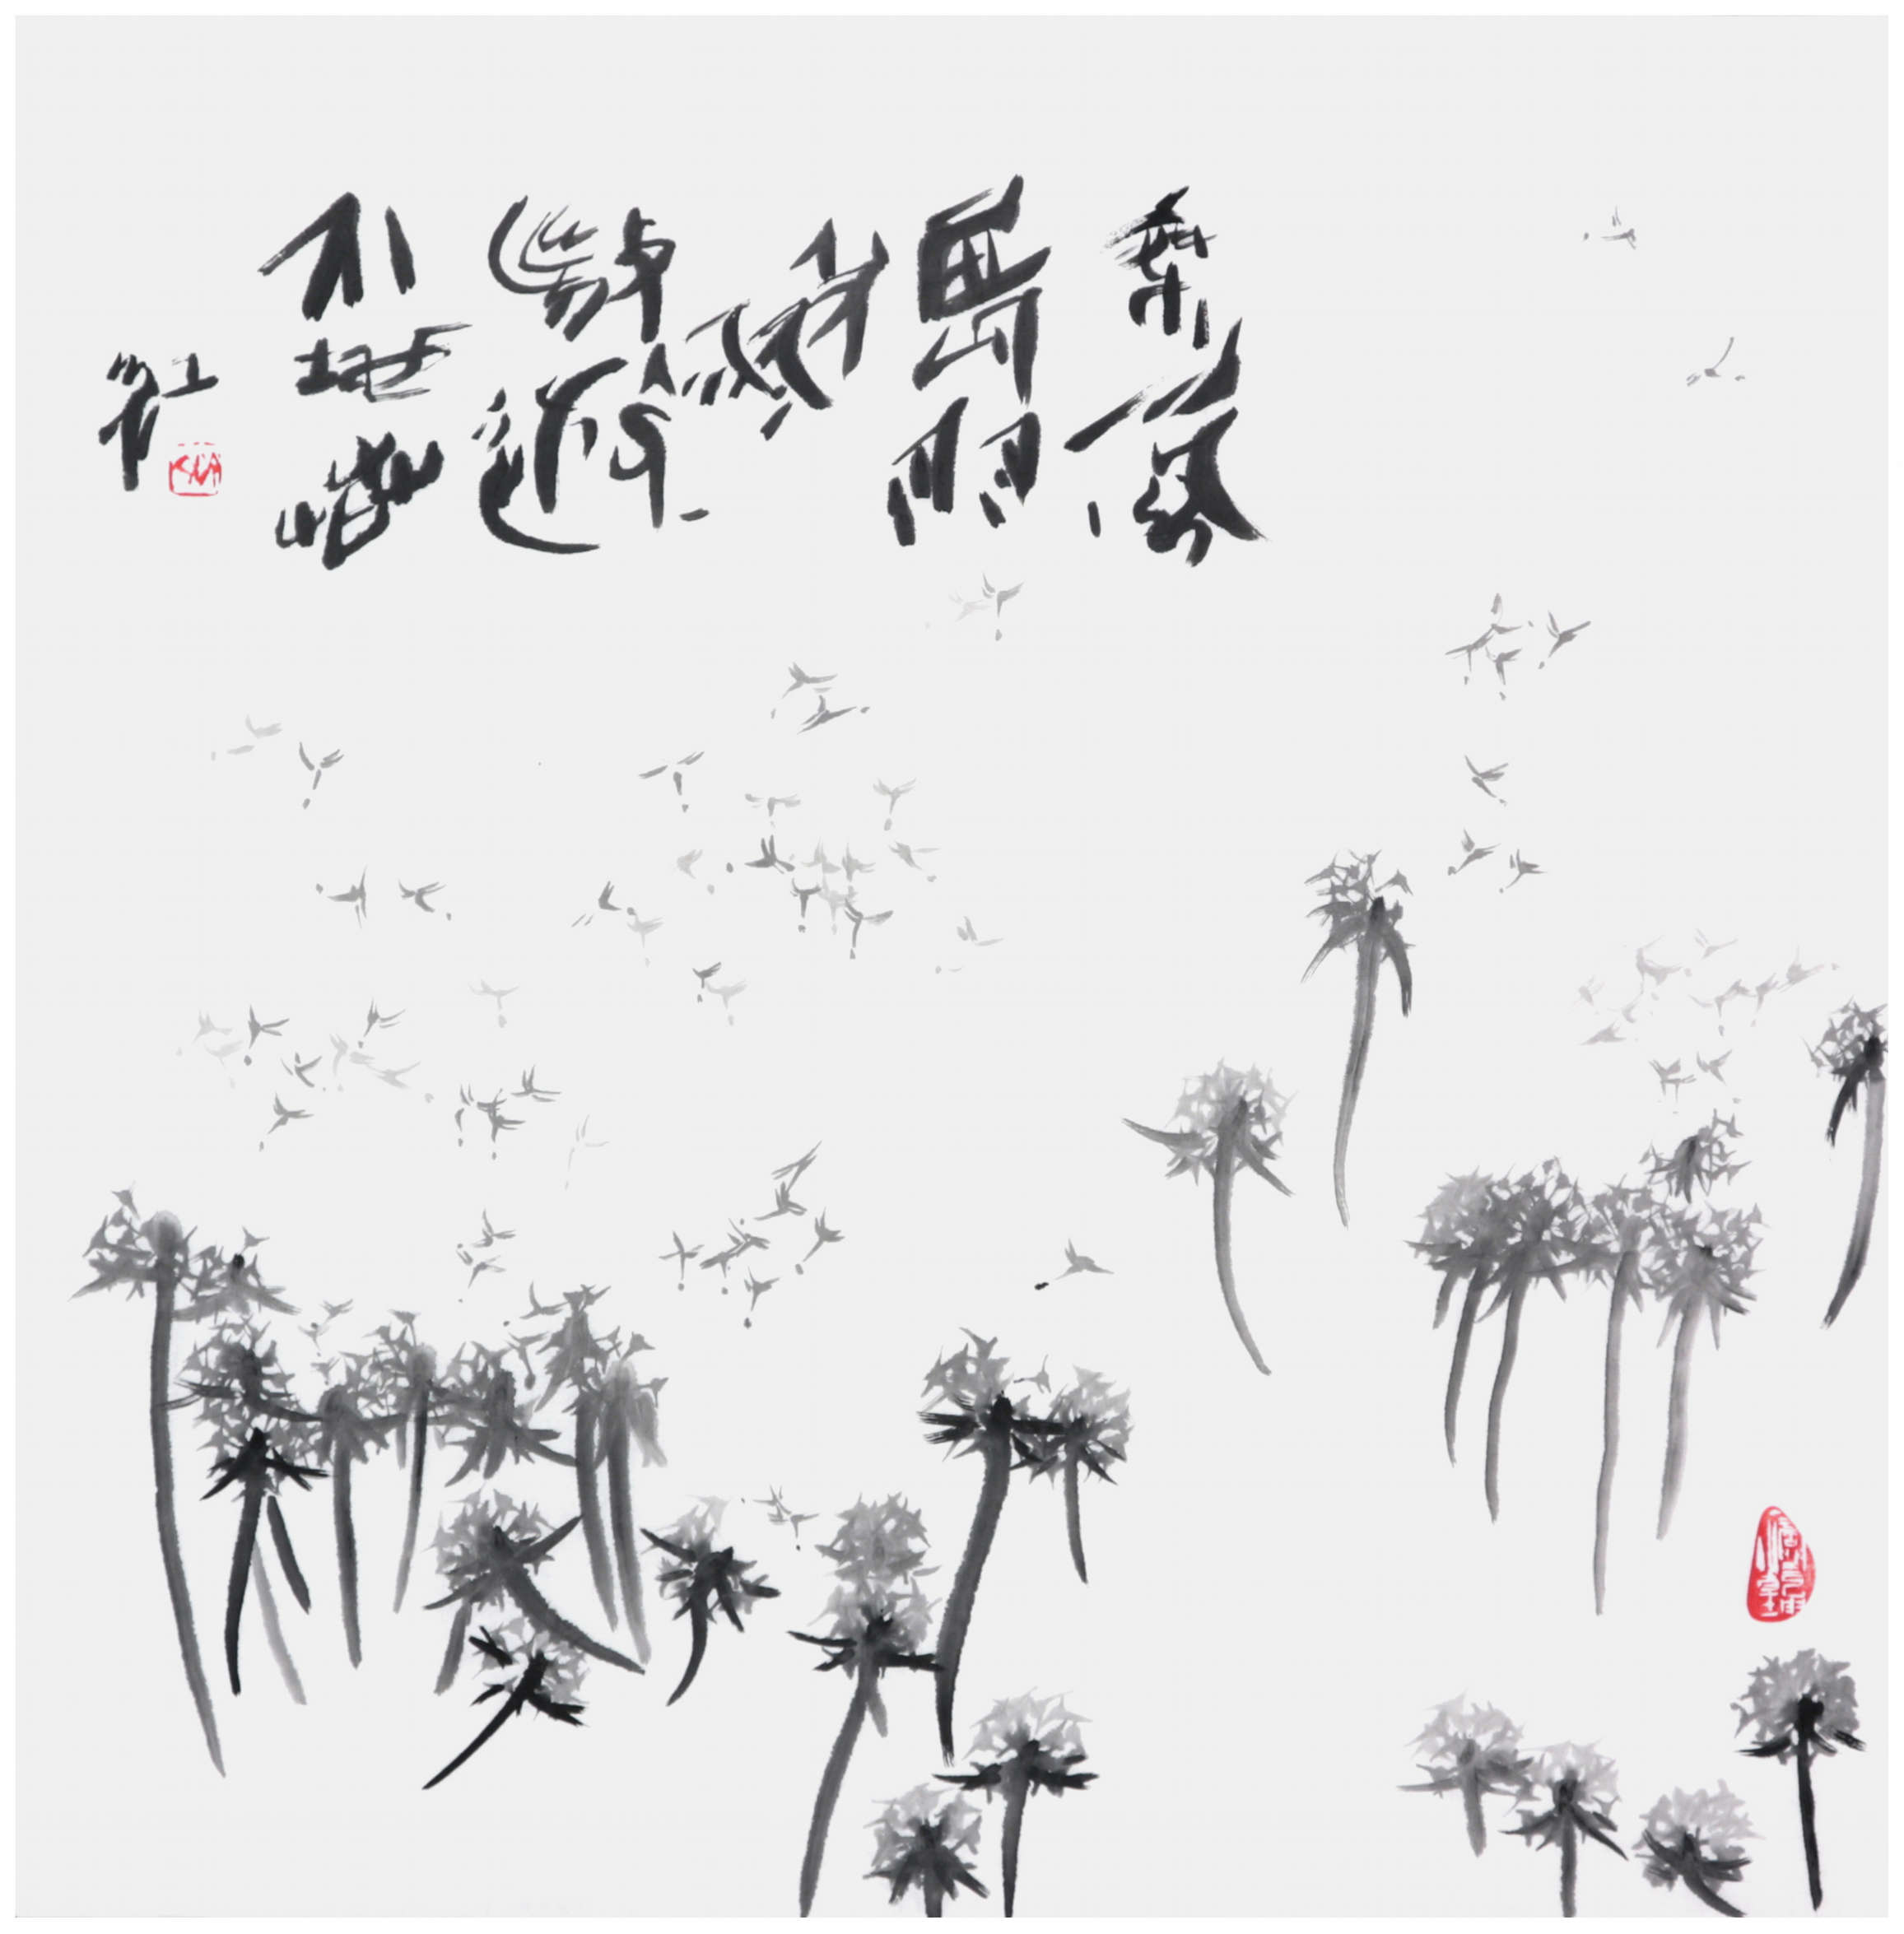 Sai Koh (Qi Hong)’s freehand brushwork Chinese painting (aka, bird-and-flower painting,  literati painting,  ink wash painting, ink painting, ink brush painting): Dandelion Blowballs and Wind-Aided Dispersal Seeded Pappus, 69×68cm, ink on Mian Liao Mian Lian Xuan paper